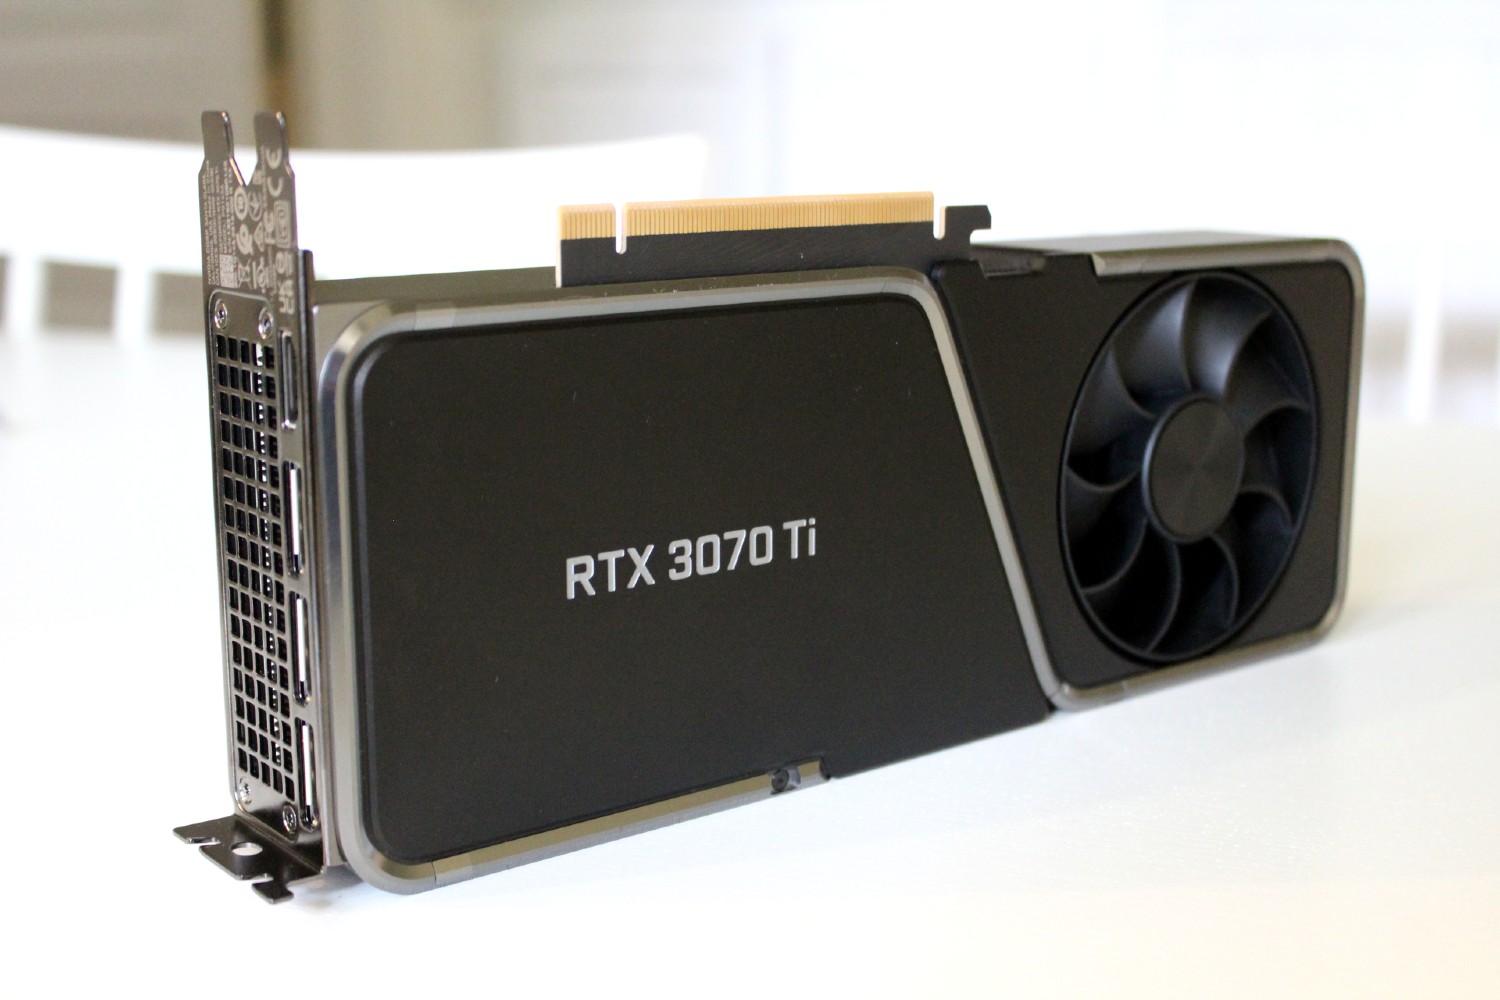 Could 3 months of FREE PC Game Pass and GeForce Now with ANY RTX 40-Series  graphics card purchase convince you to pick up NVIDIA's latest GPU?